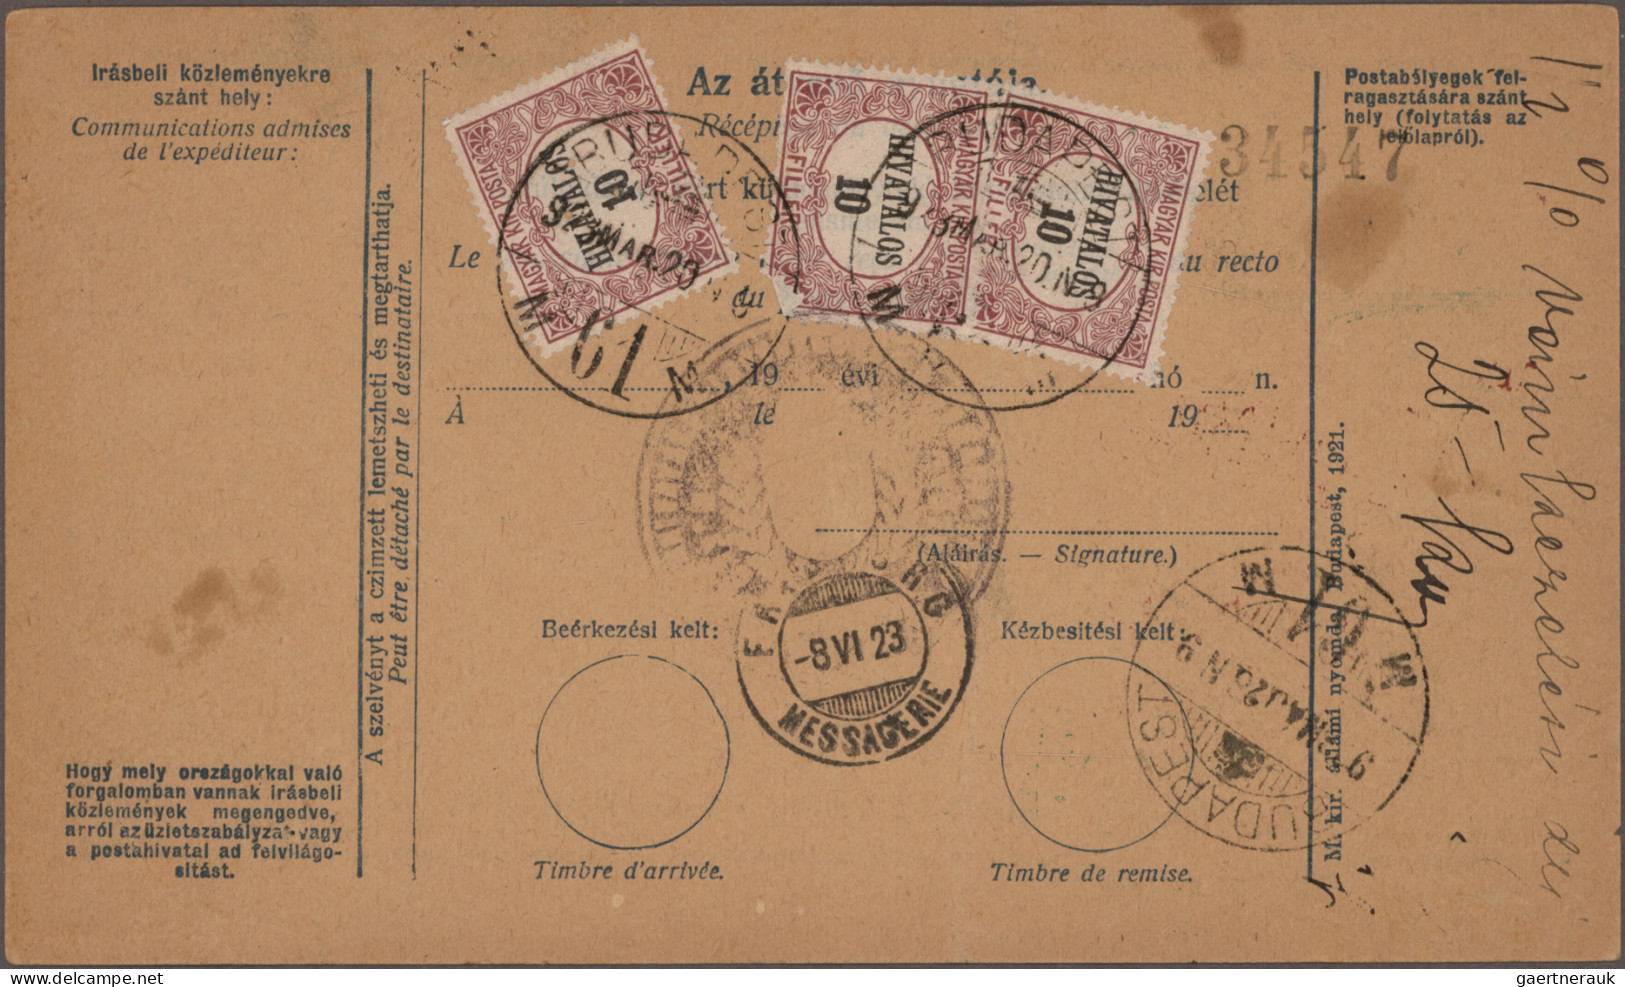 Hungary: 1896/1928, petty collection of 15 covers/cards/parcel despatch forms se